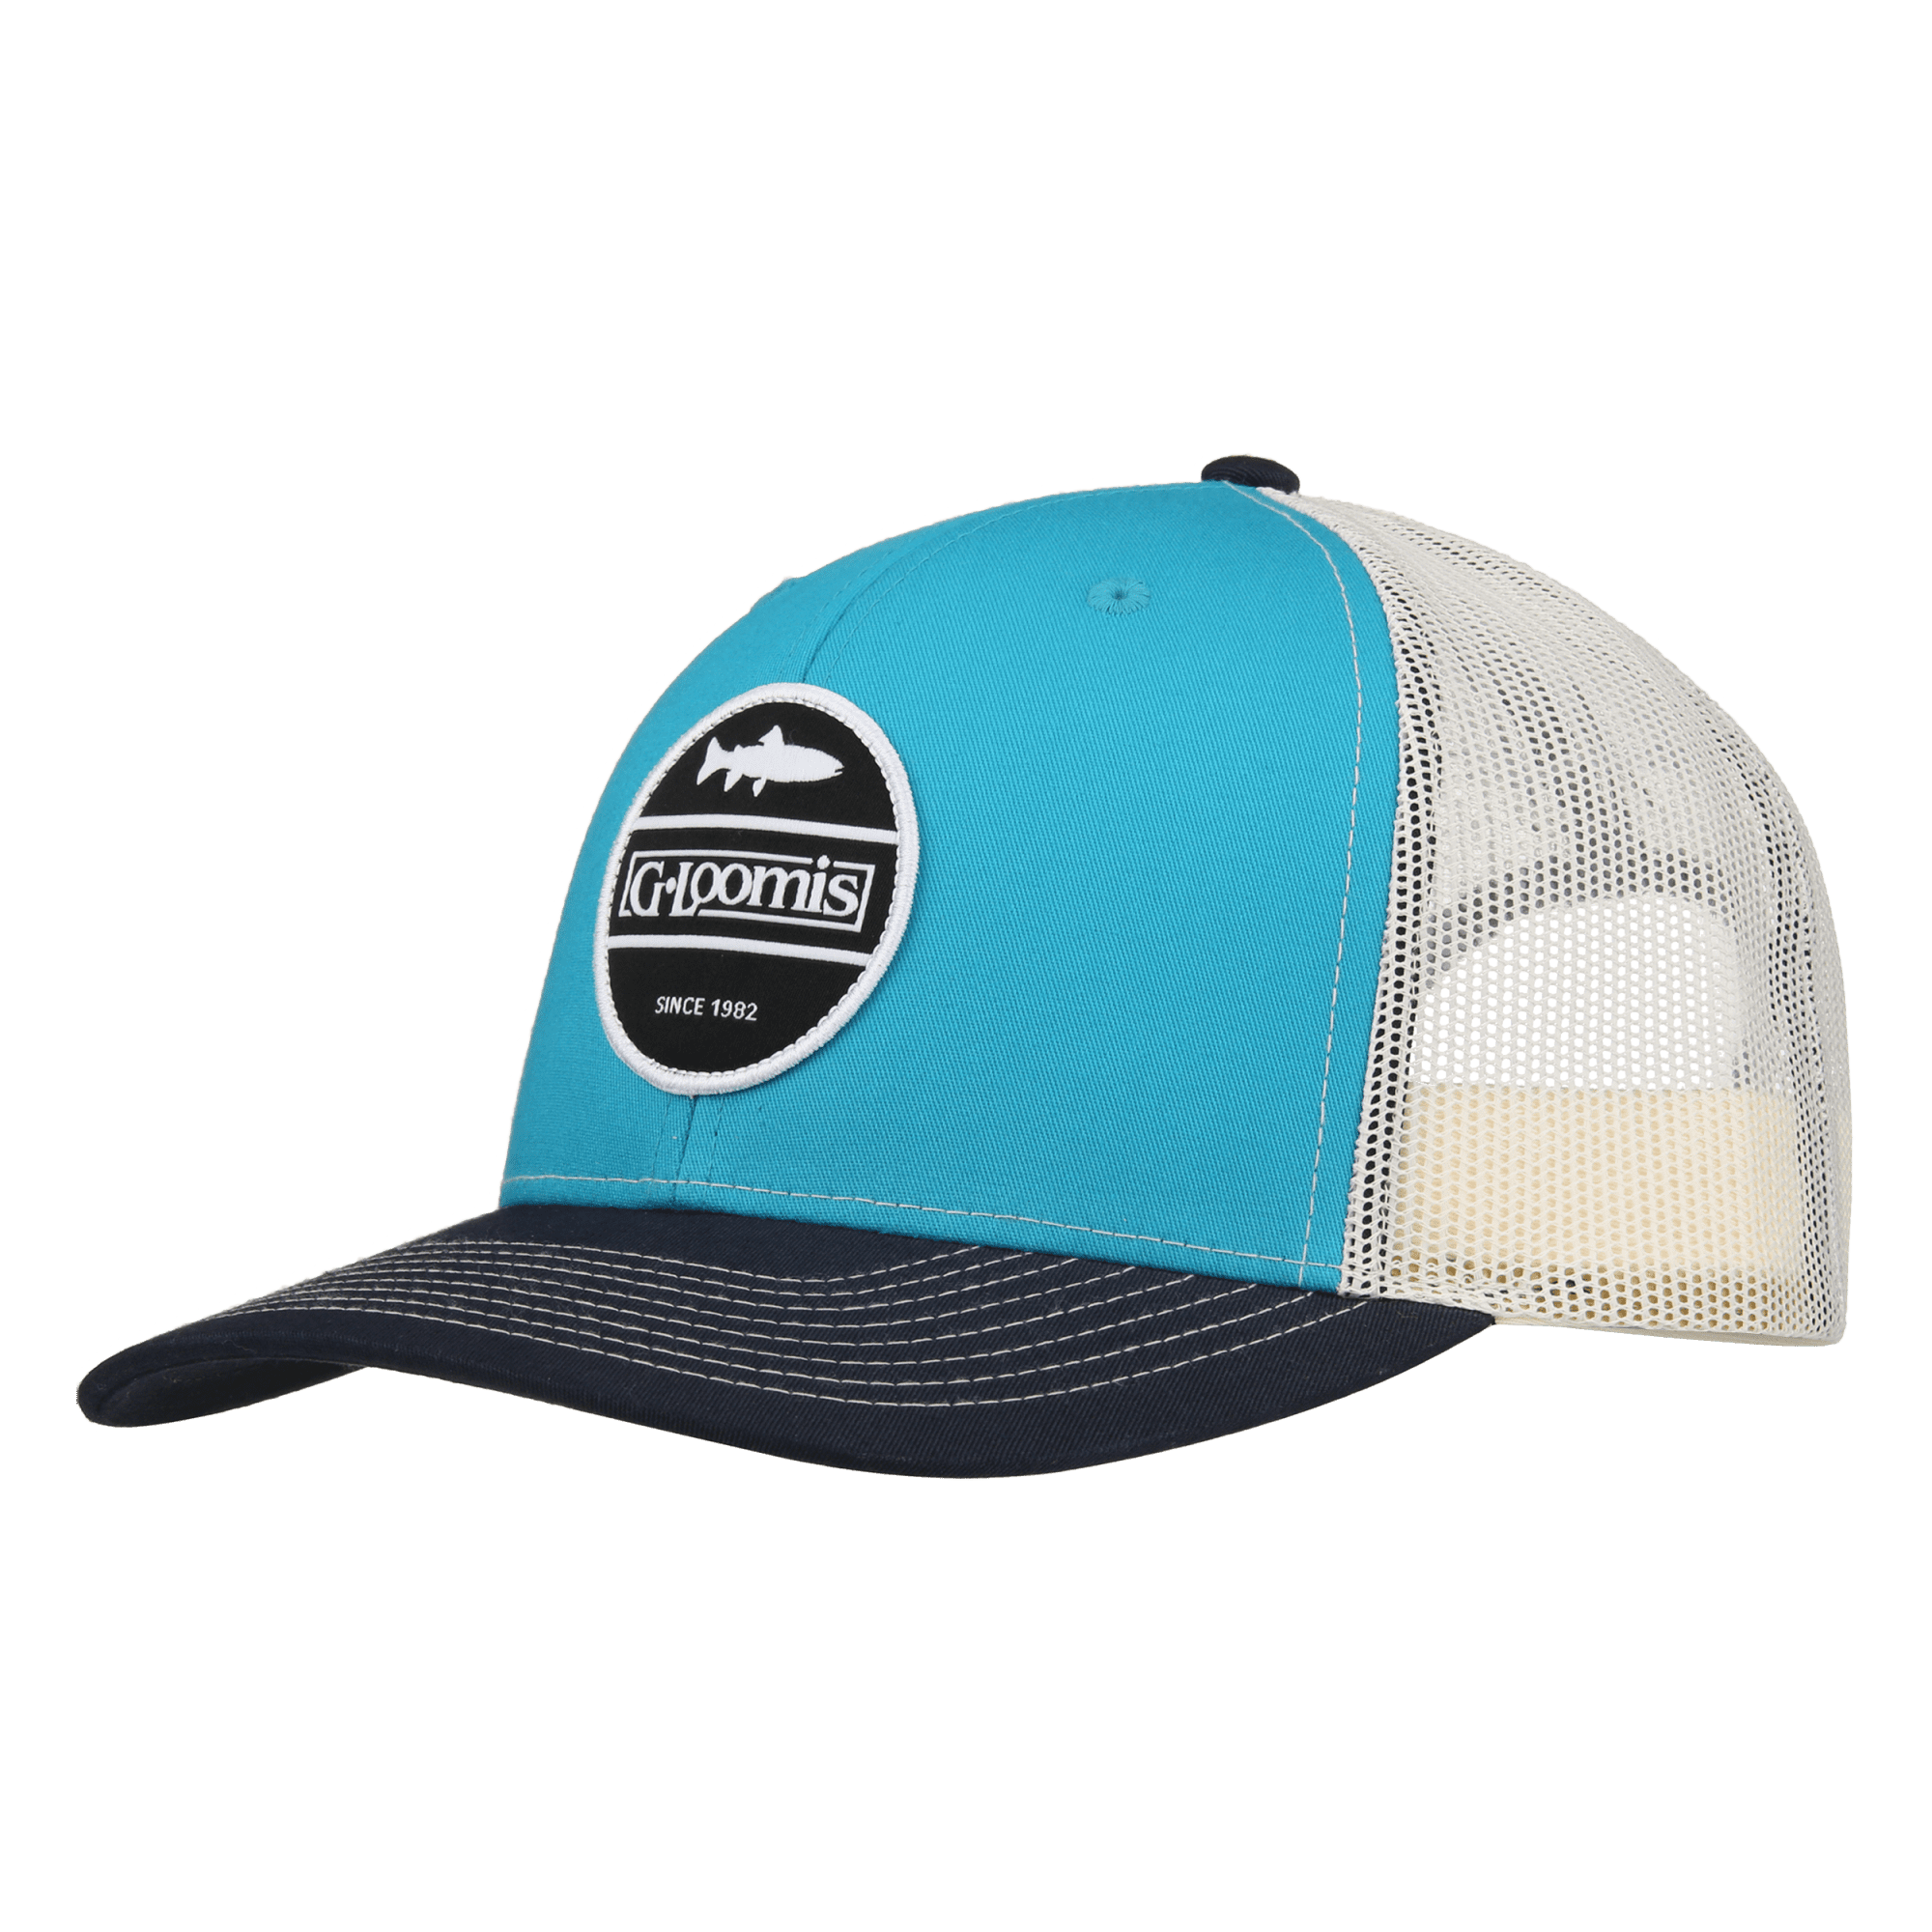 Gloomis Fishing G. Loomis Fish Patch Cap - Blue_Teal/Birch/Navy, One Size  Fits Most [GHATFSHPTCHBLT]